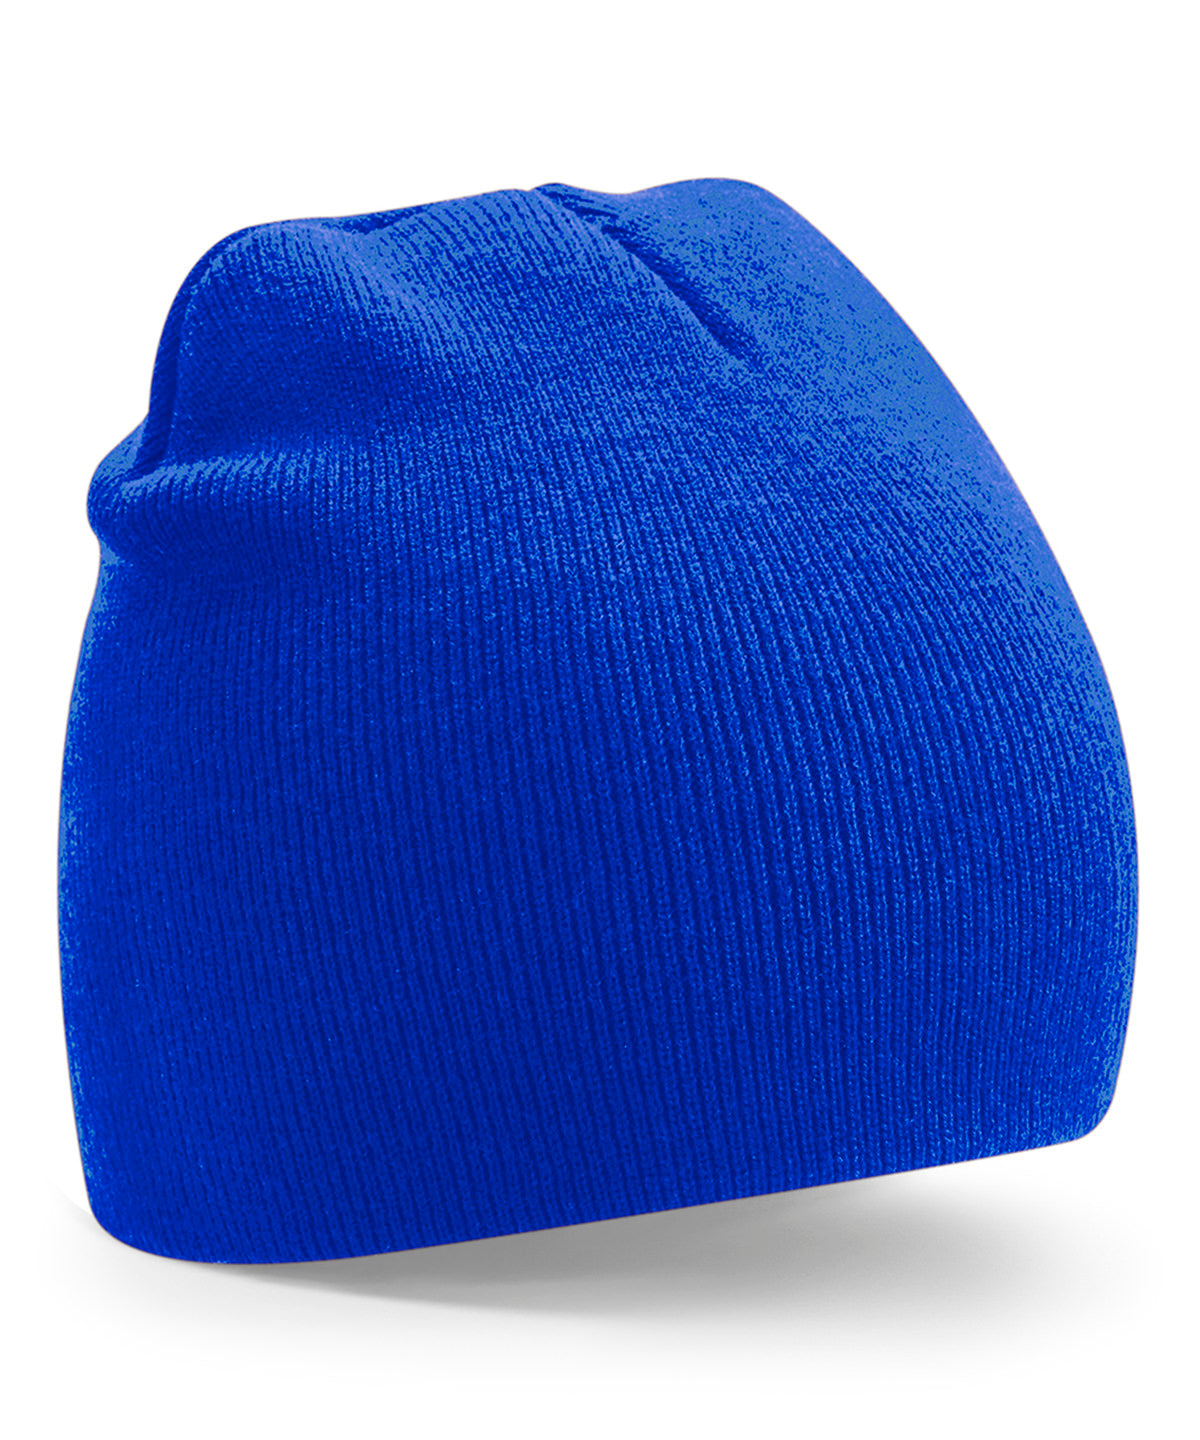 Personalised Hats - Royal Beechfield Recycled original pull-on beanie